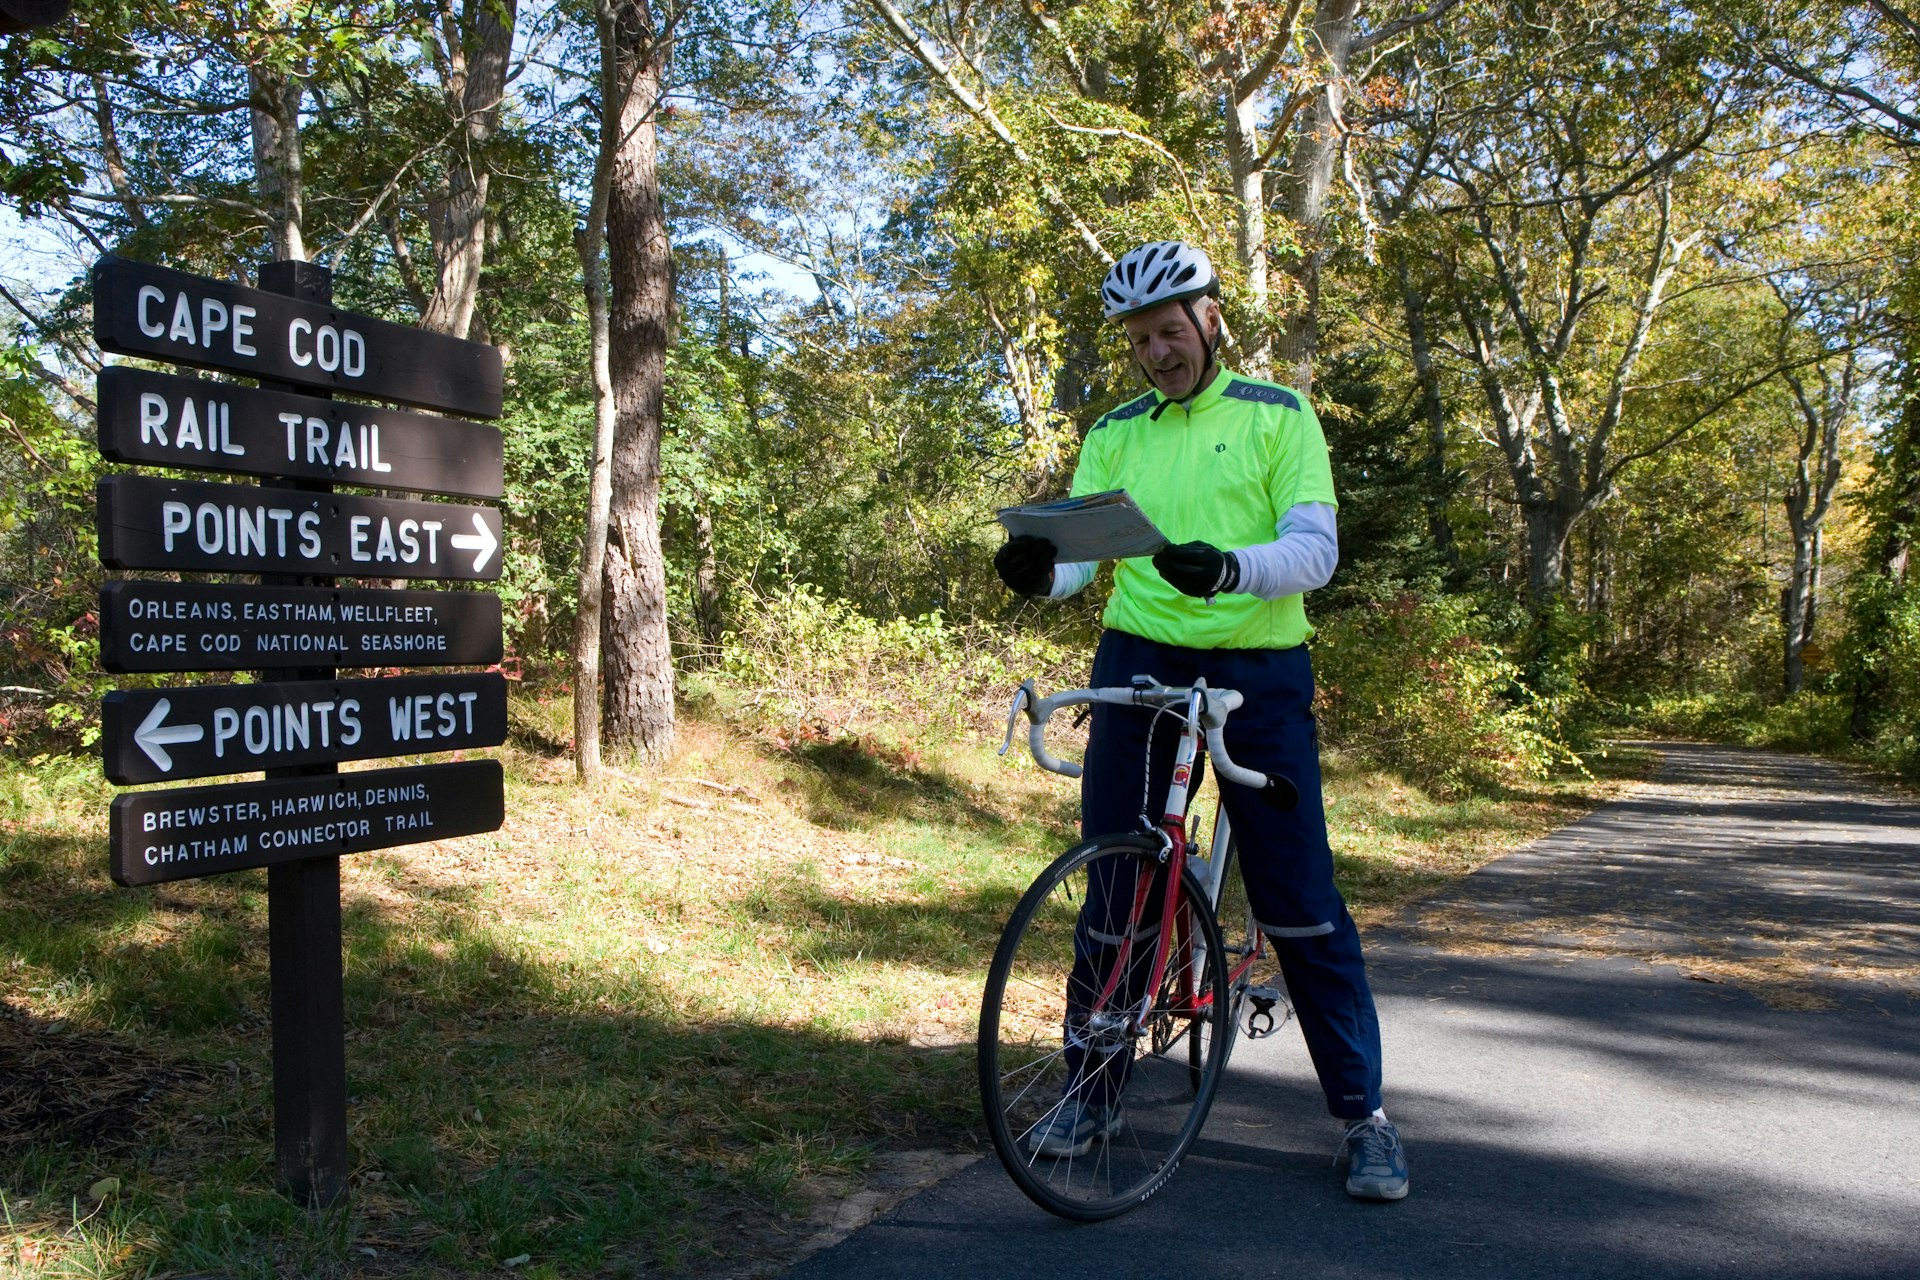 Cape Cod: Nickerson State Park / Cape Cod Trail with sign & cyclist